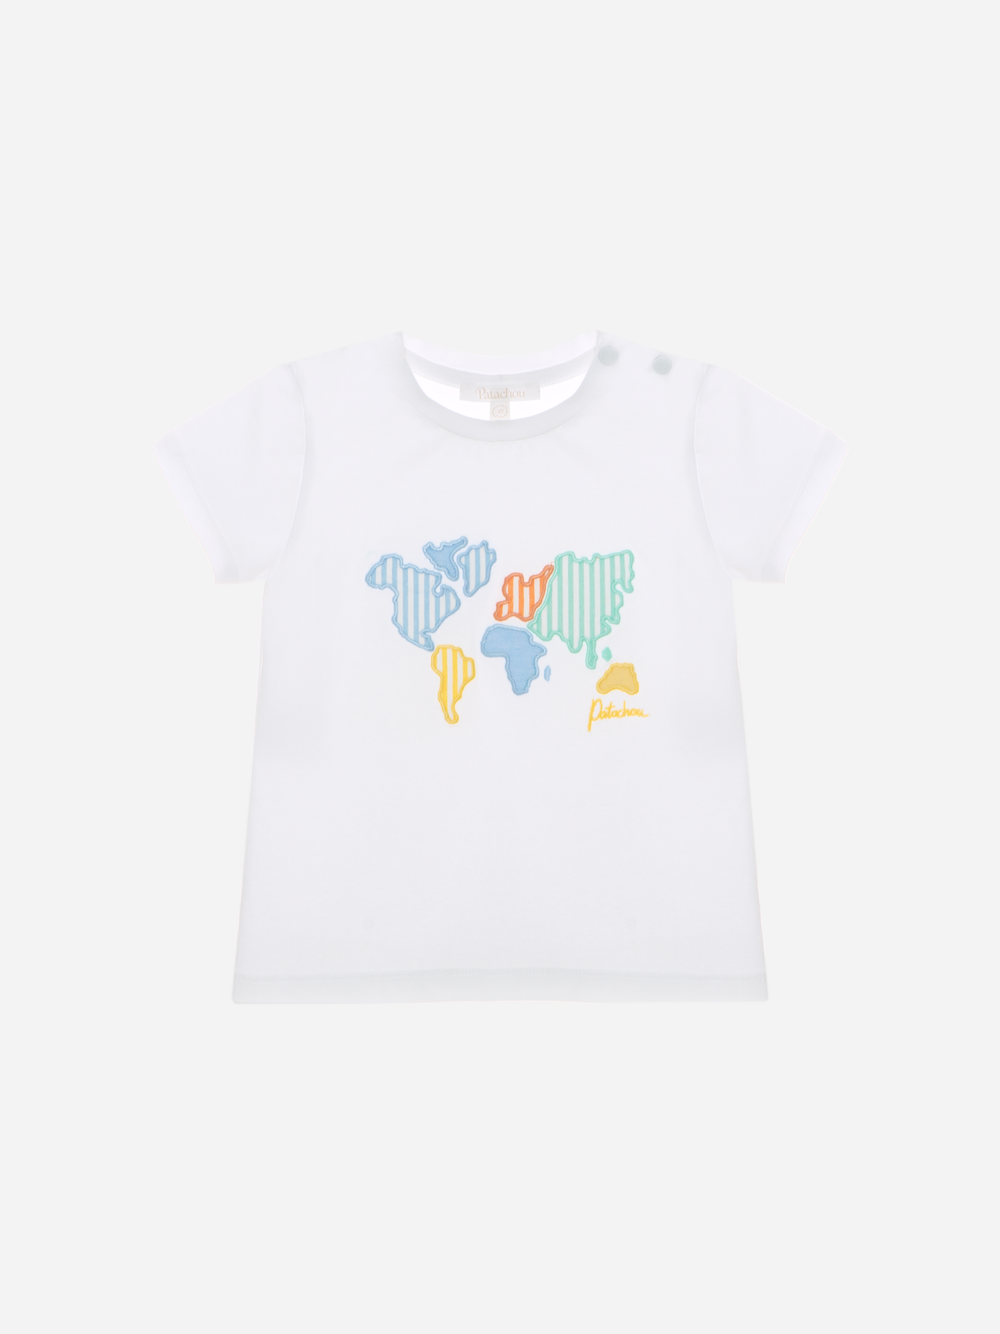 White t-shirt with multicolor world map